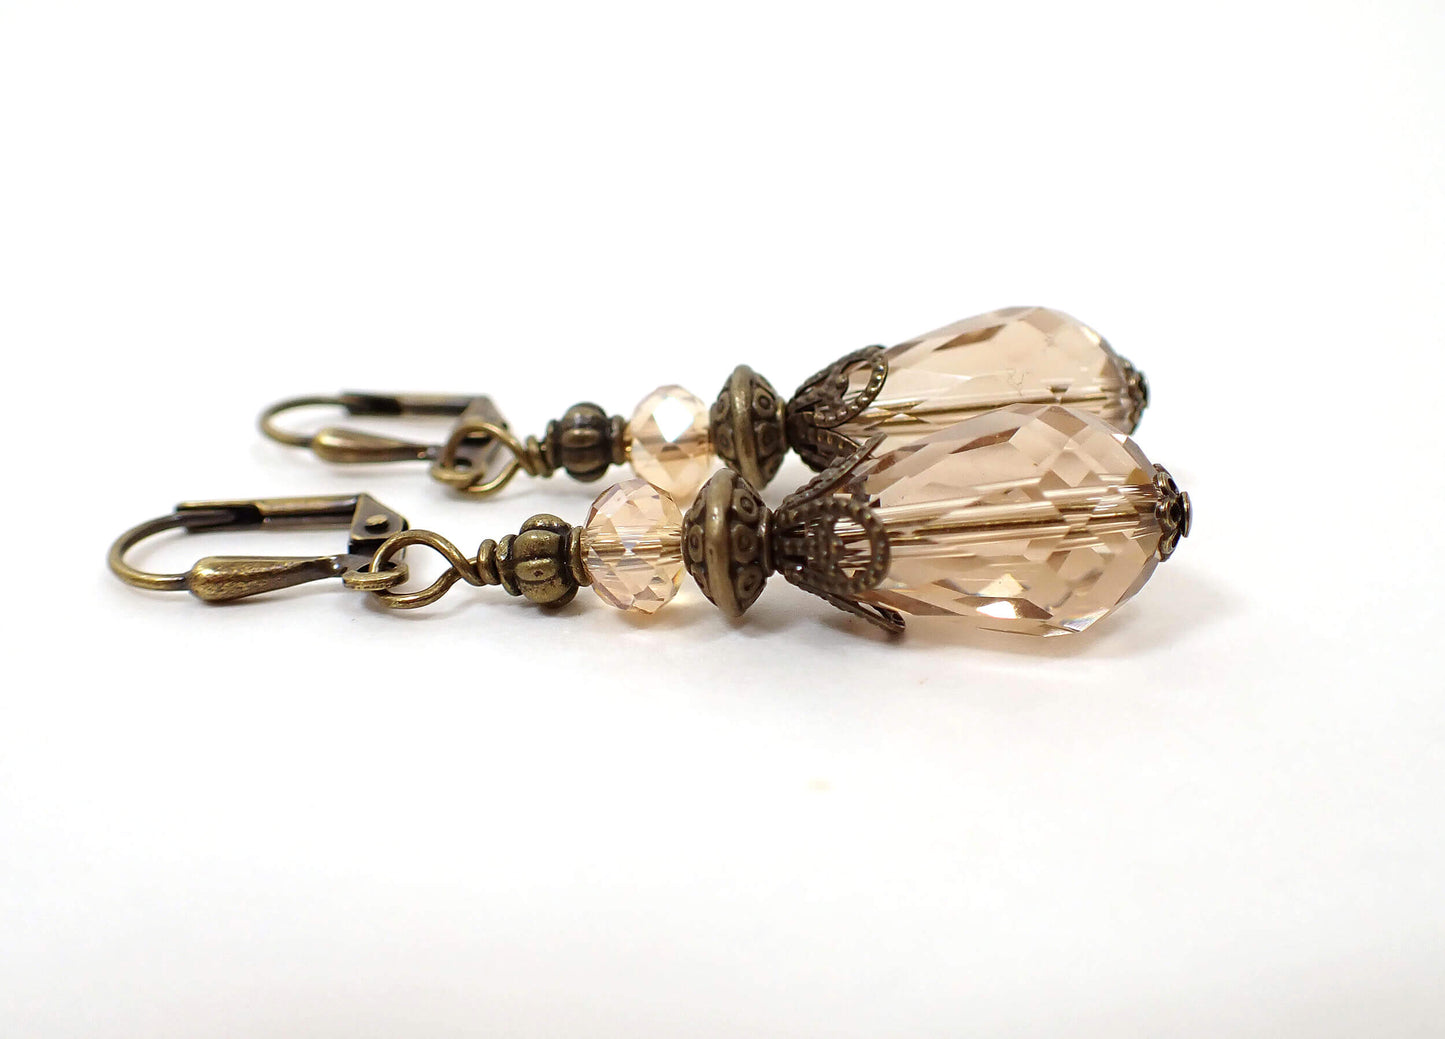 Handmade Vintage Style Peach Color Teardrop Earrings with Antiqued Brass Hook Lever Back or Clip On